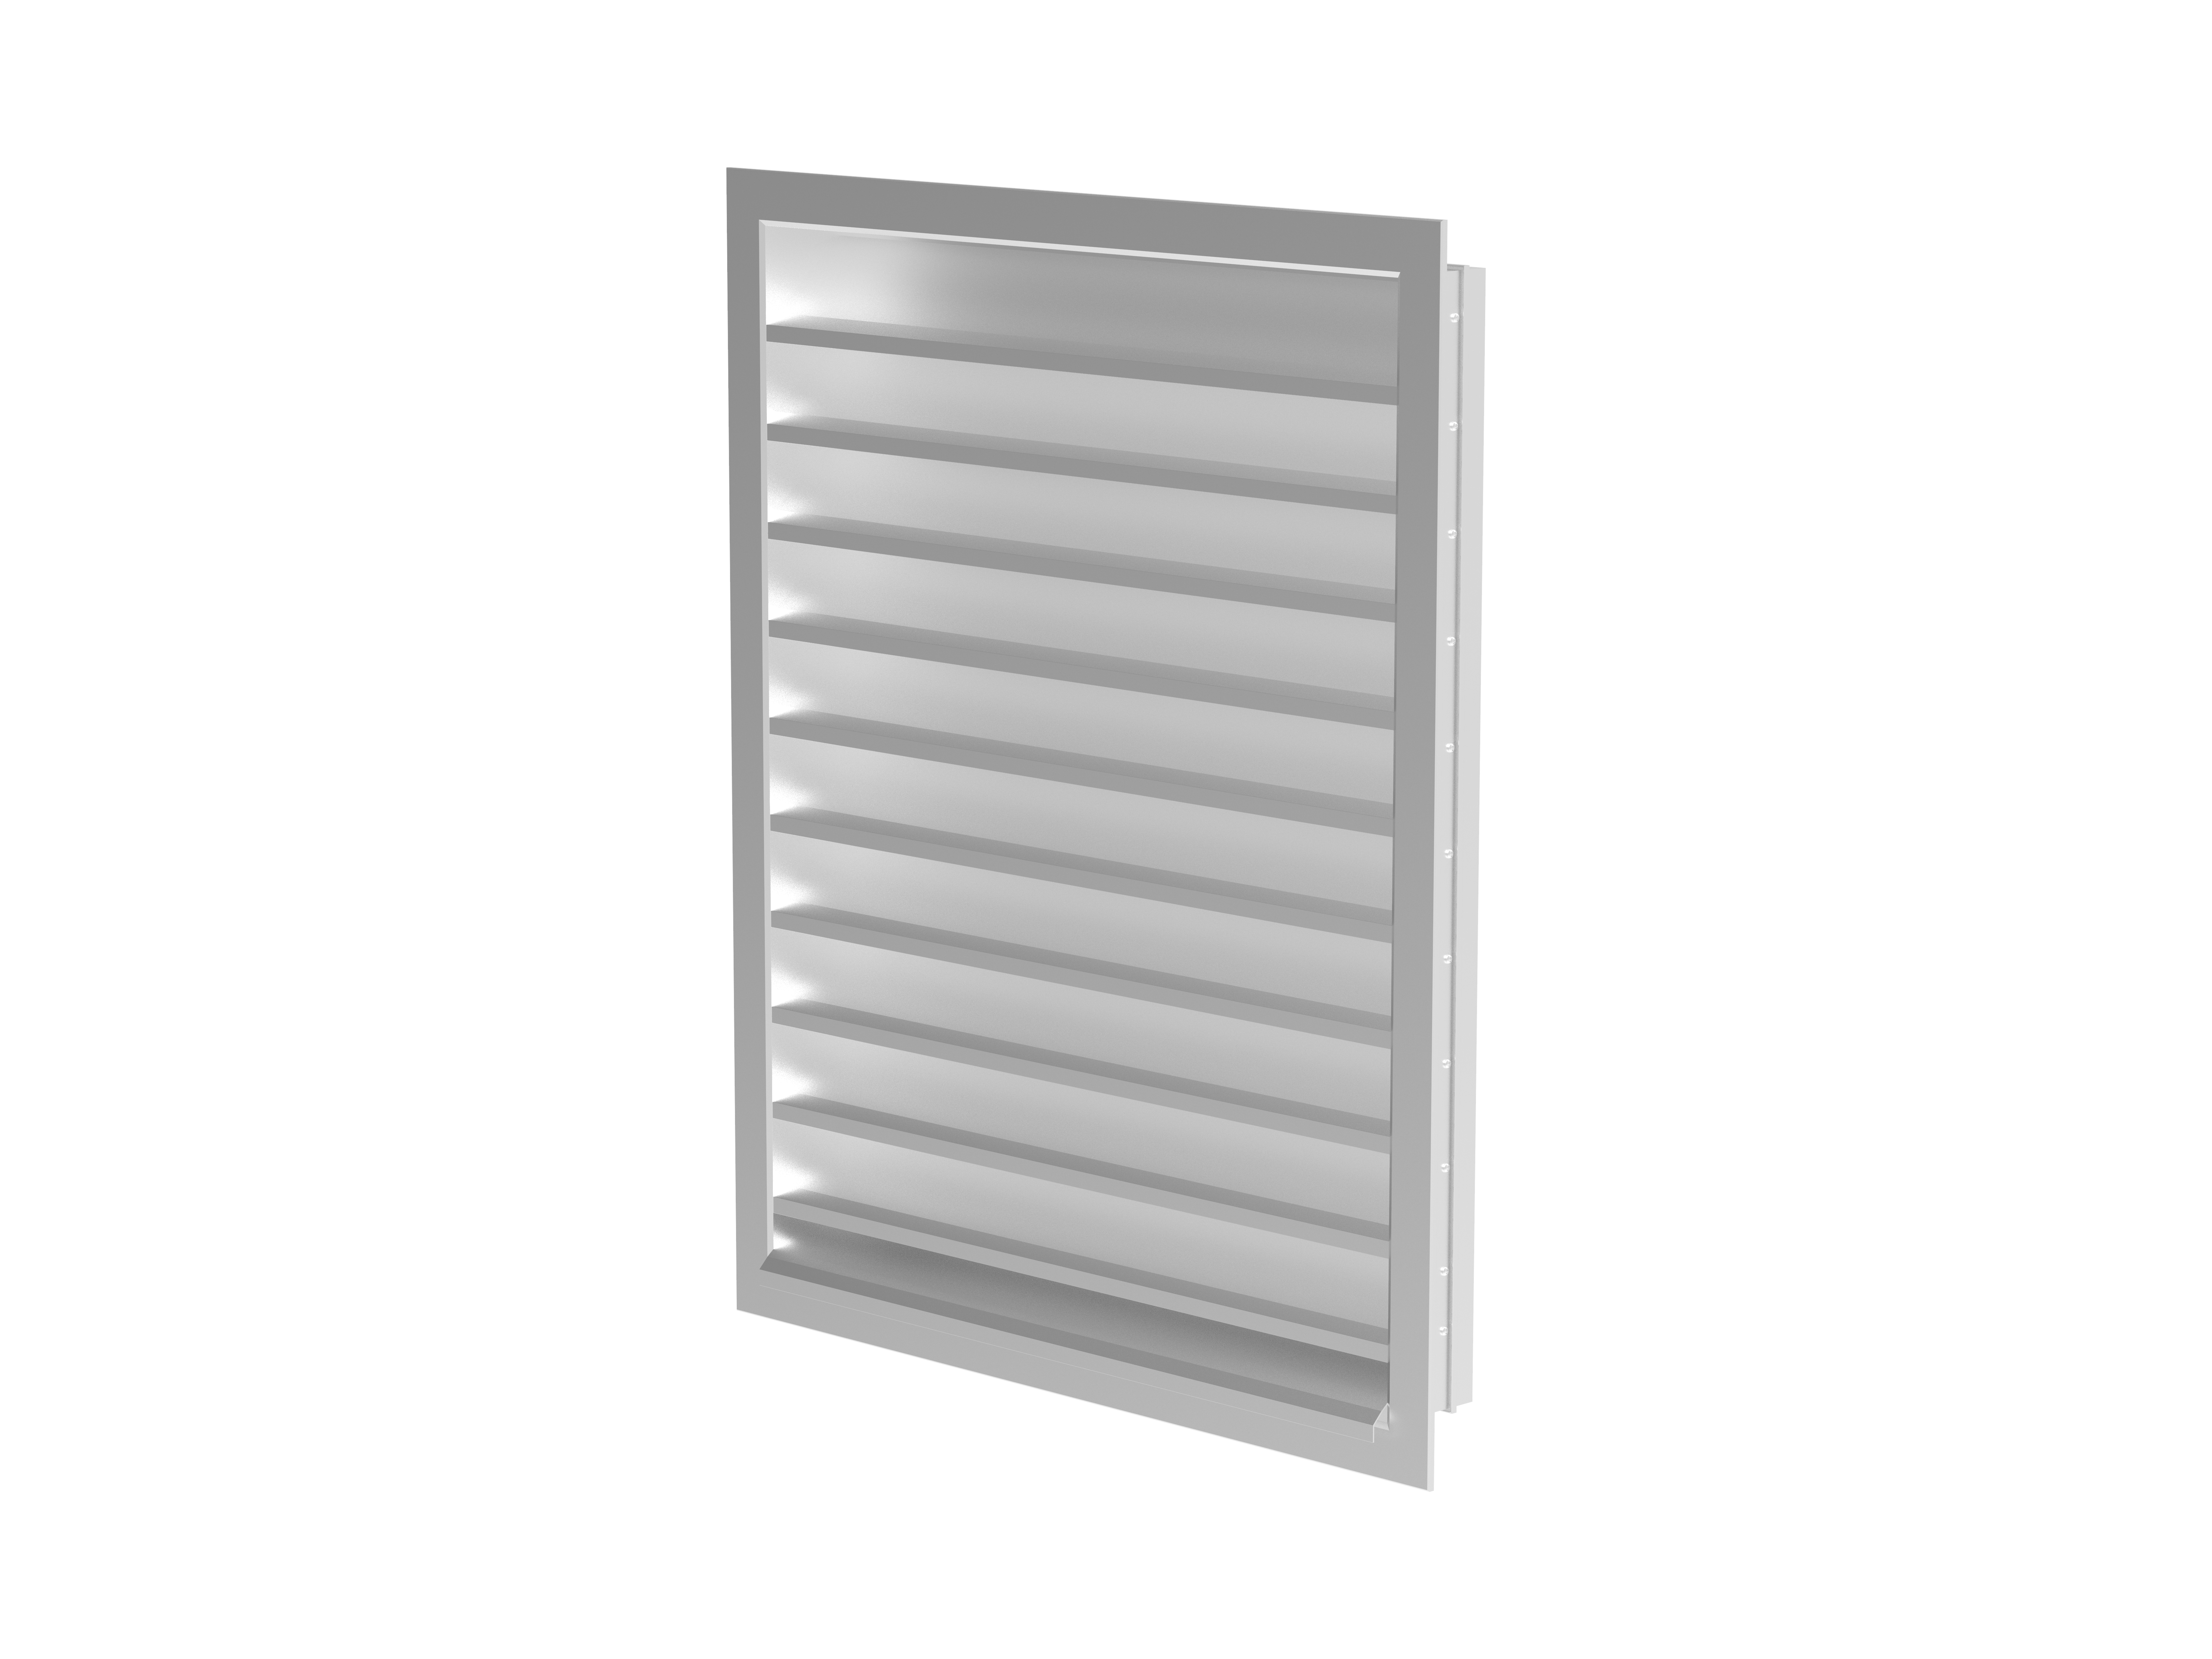 PZALS - Louvres - Air Distribution Products - Ürünler - Systemair